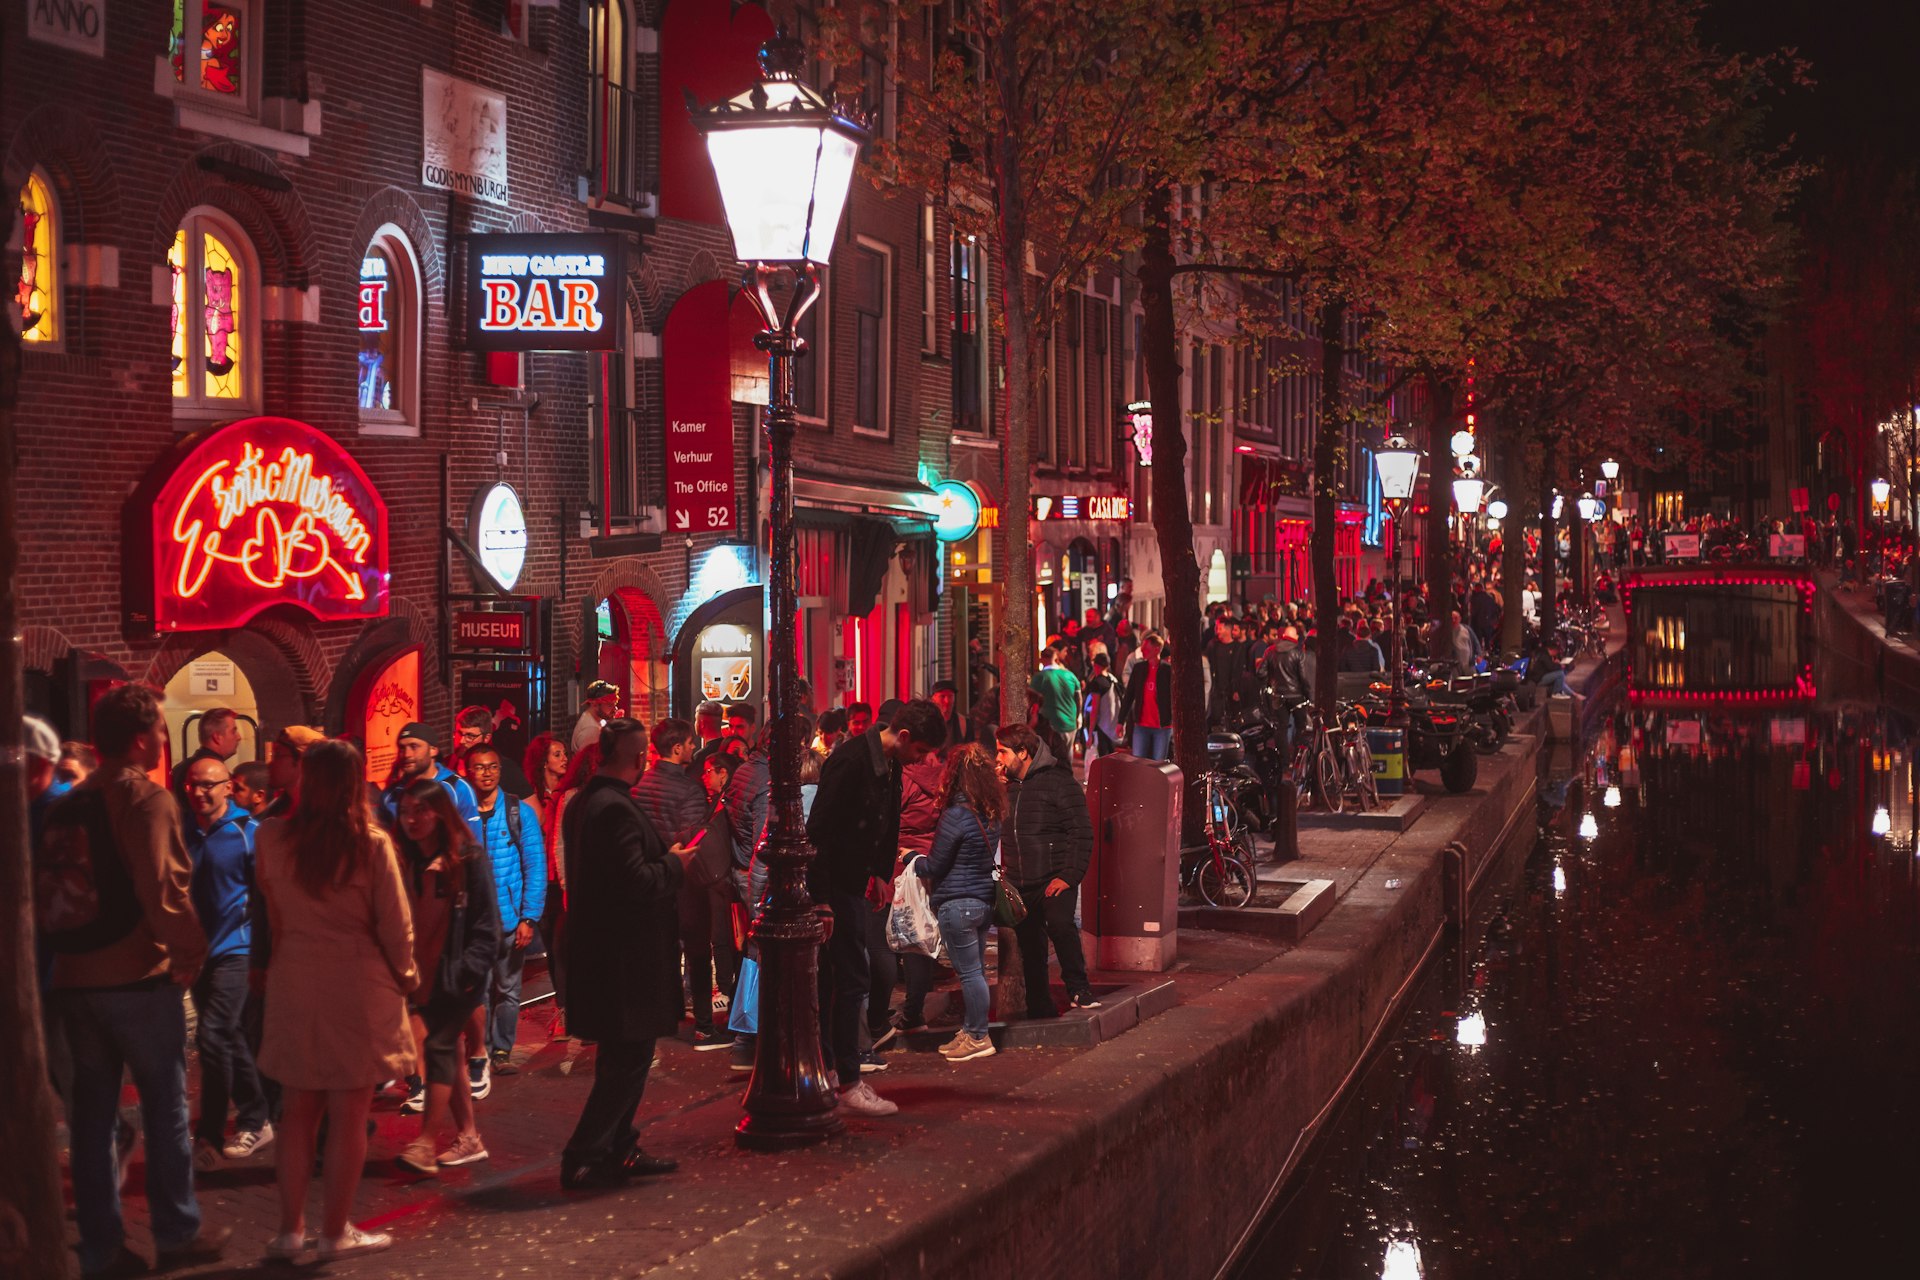 Crowds along a canal in the Red Light District, Amsterdam, Netherlands